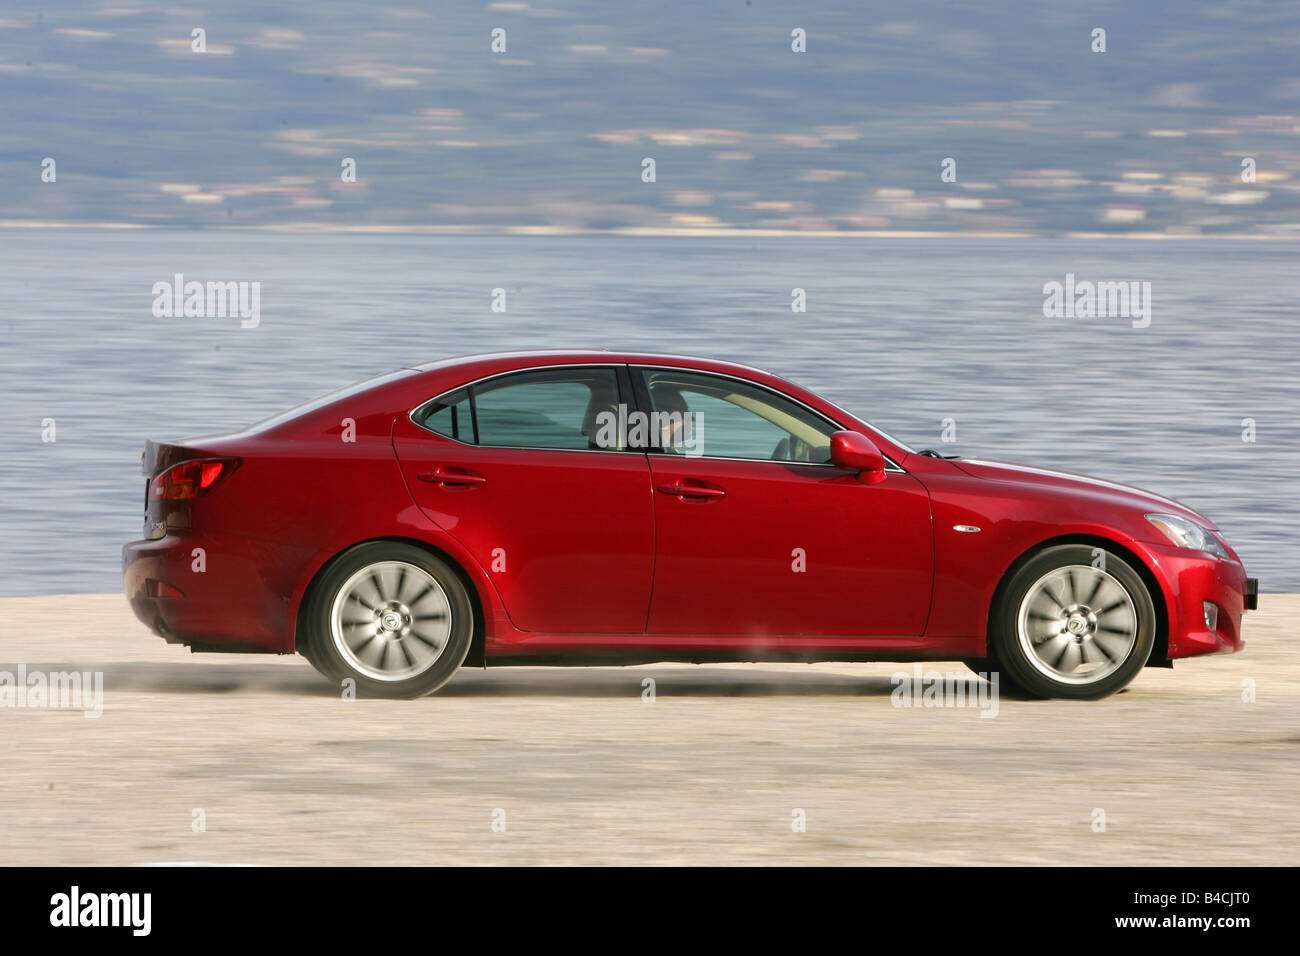 Lexus IS 250, model year 2005-, red, driving, side view, lake Stock Photo